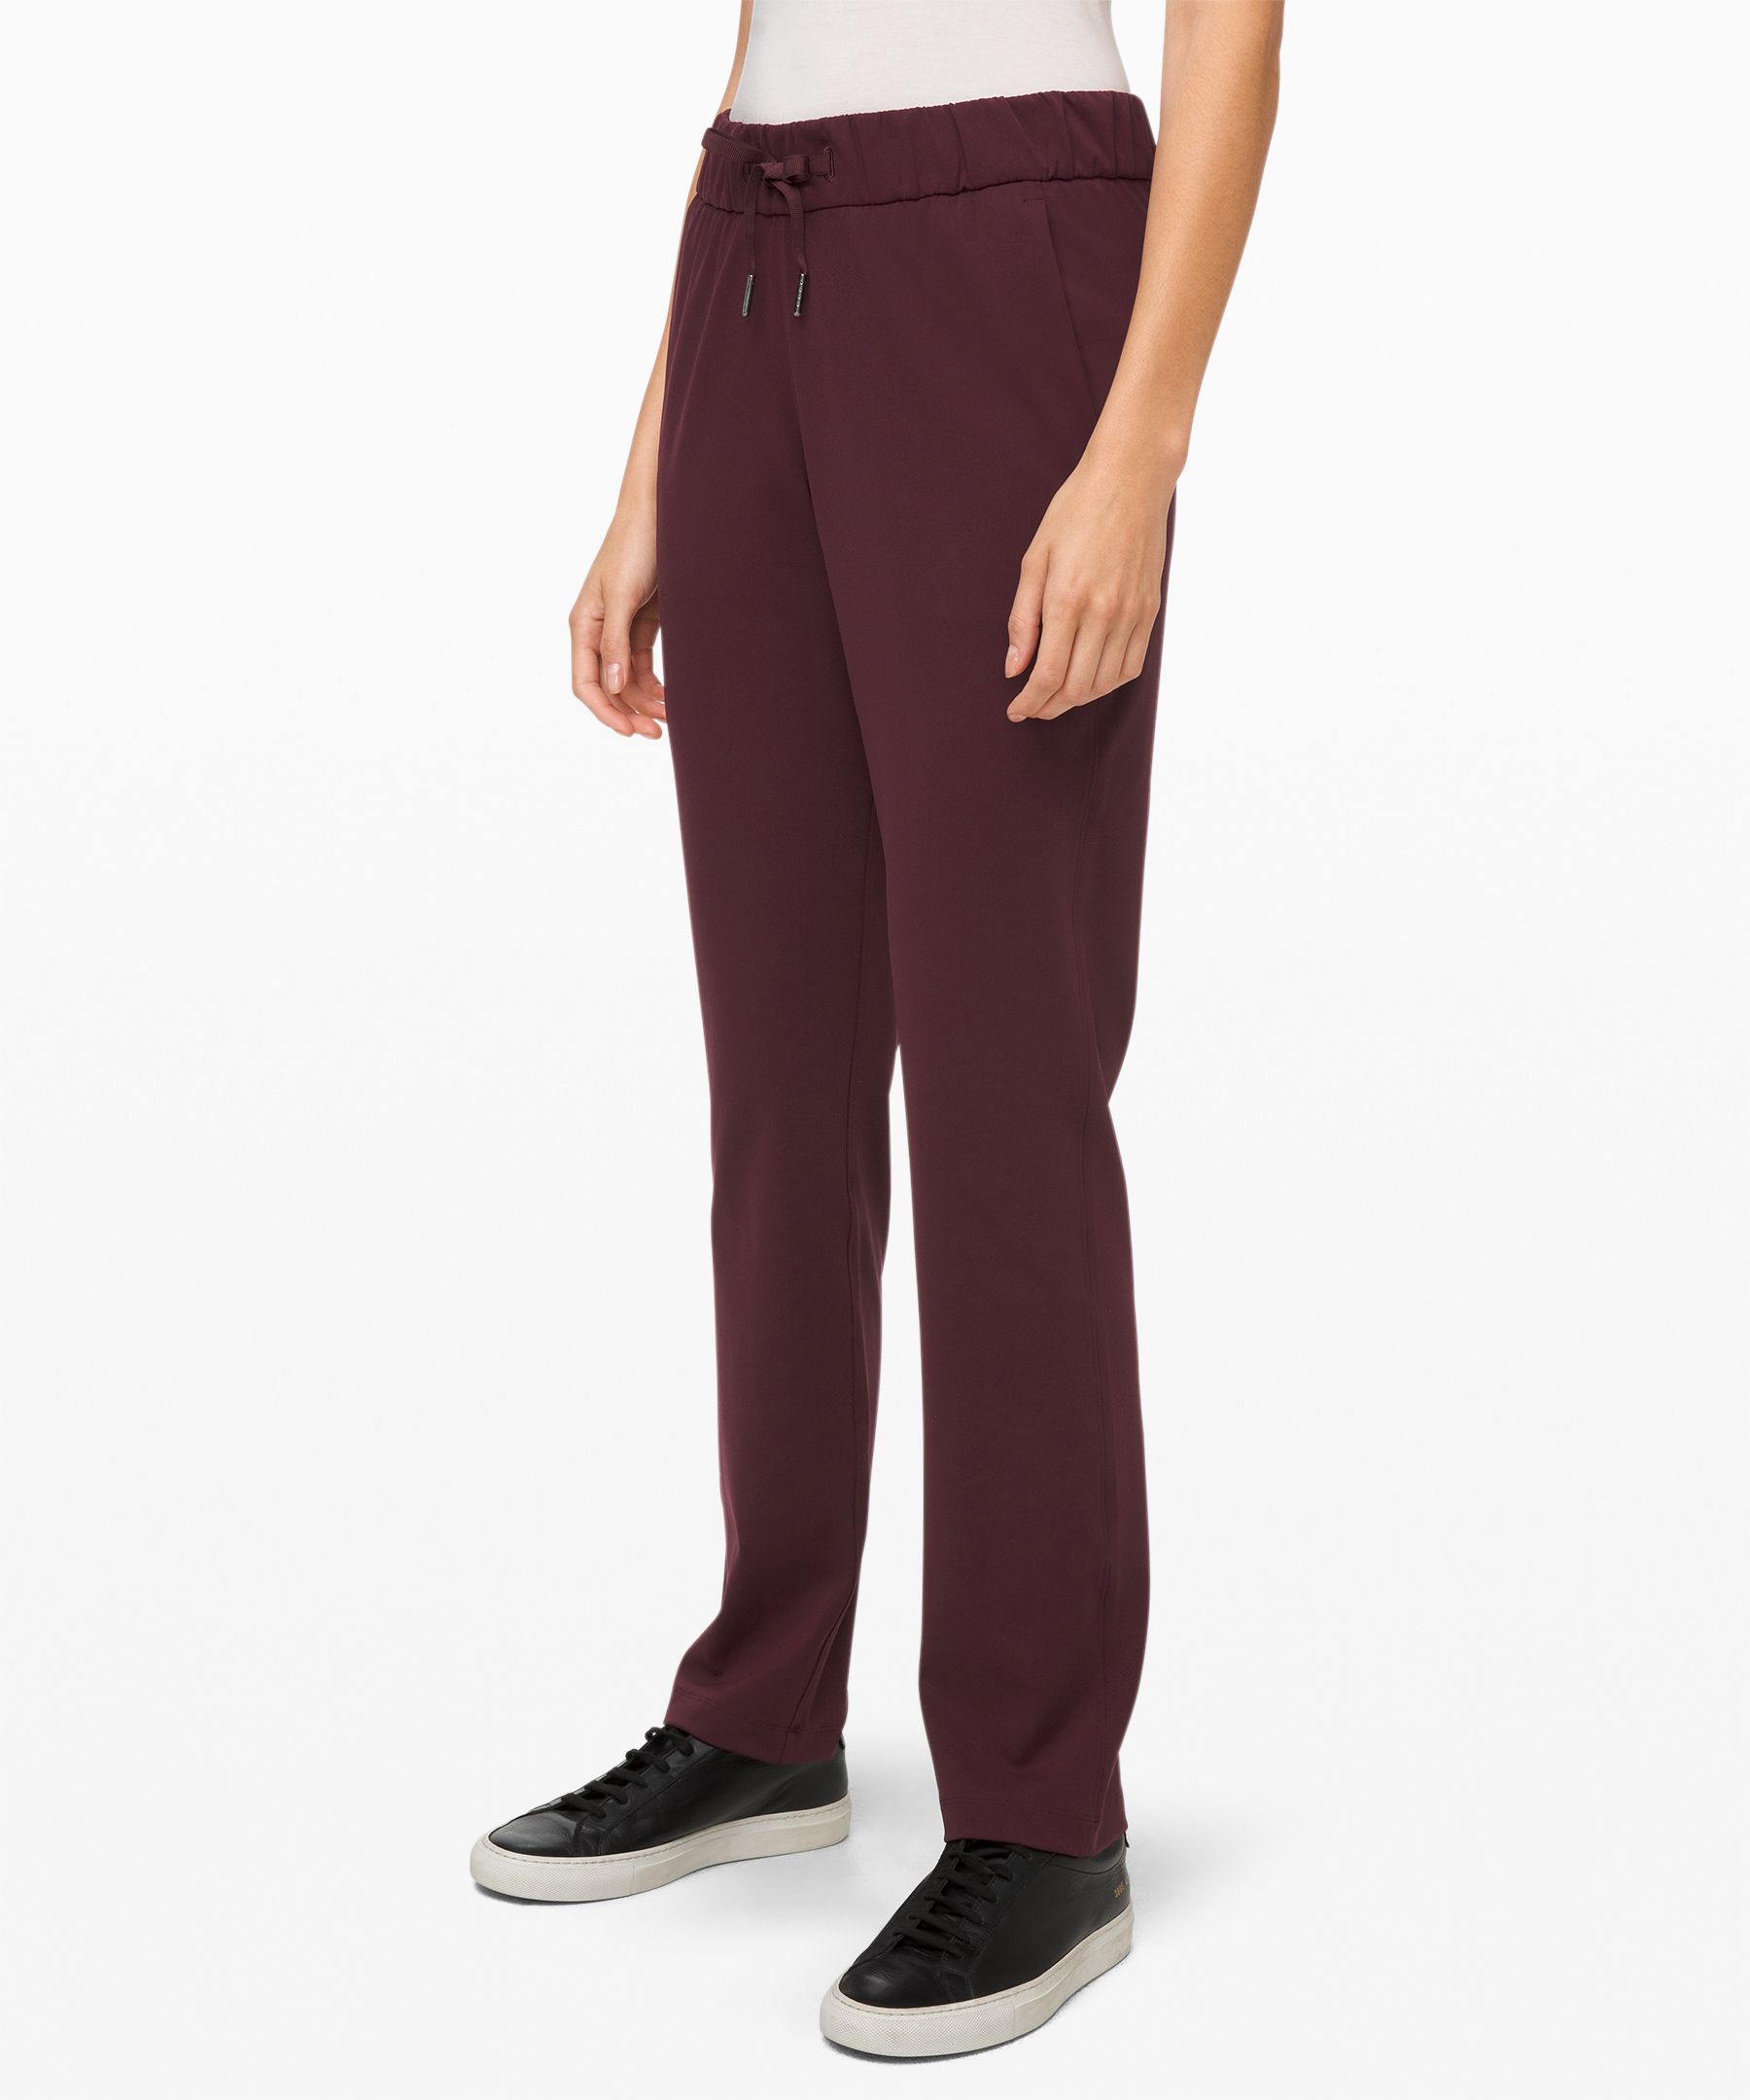 On the Fly Pant *Luxtreme, my new obsession *details in comments* :  r/lululemon